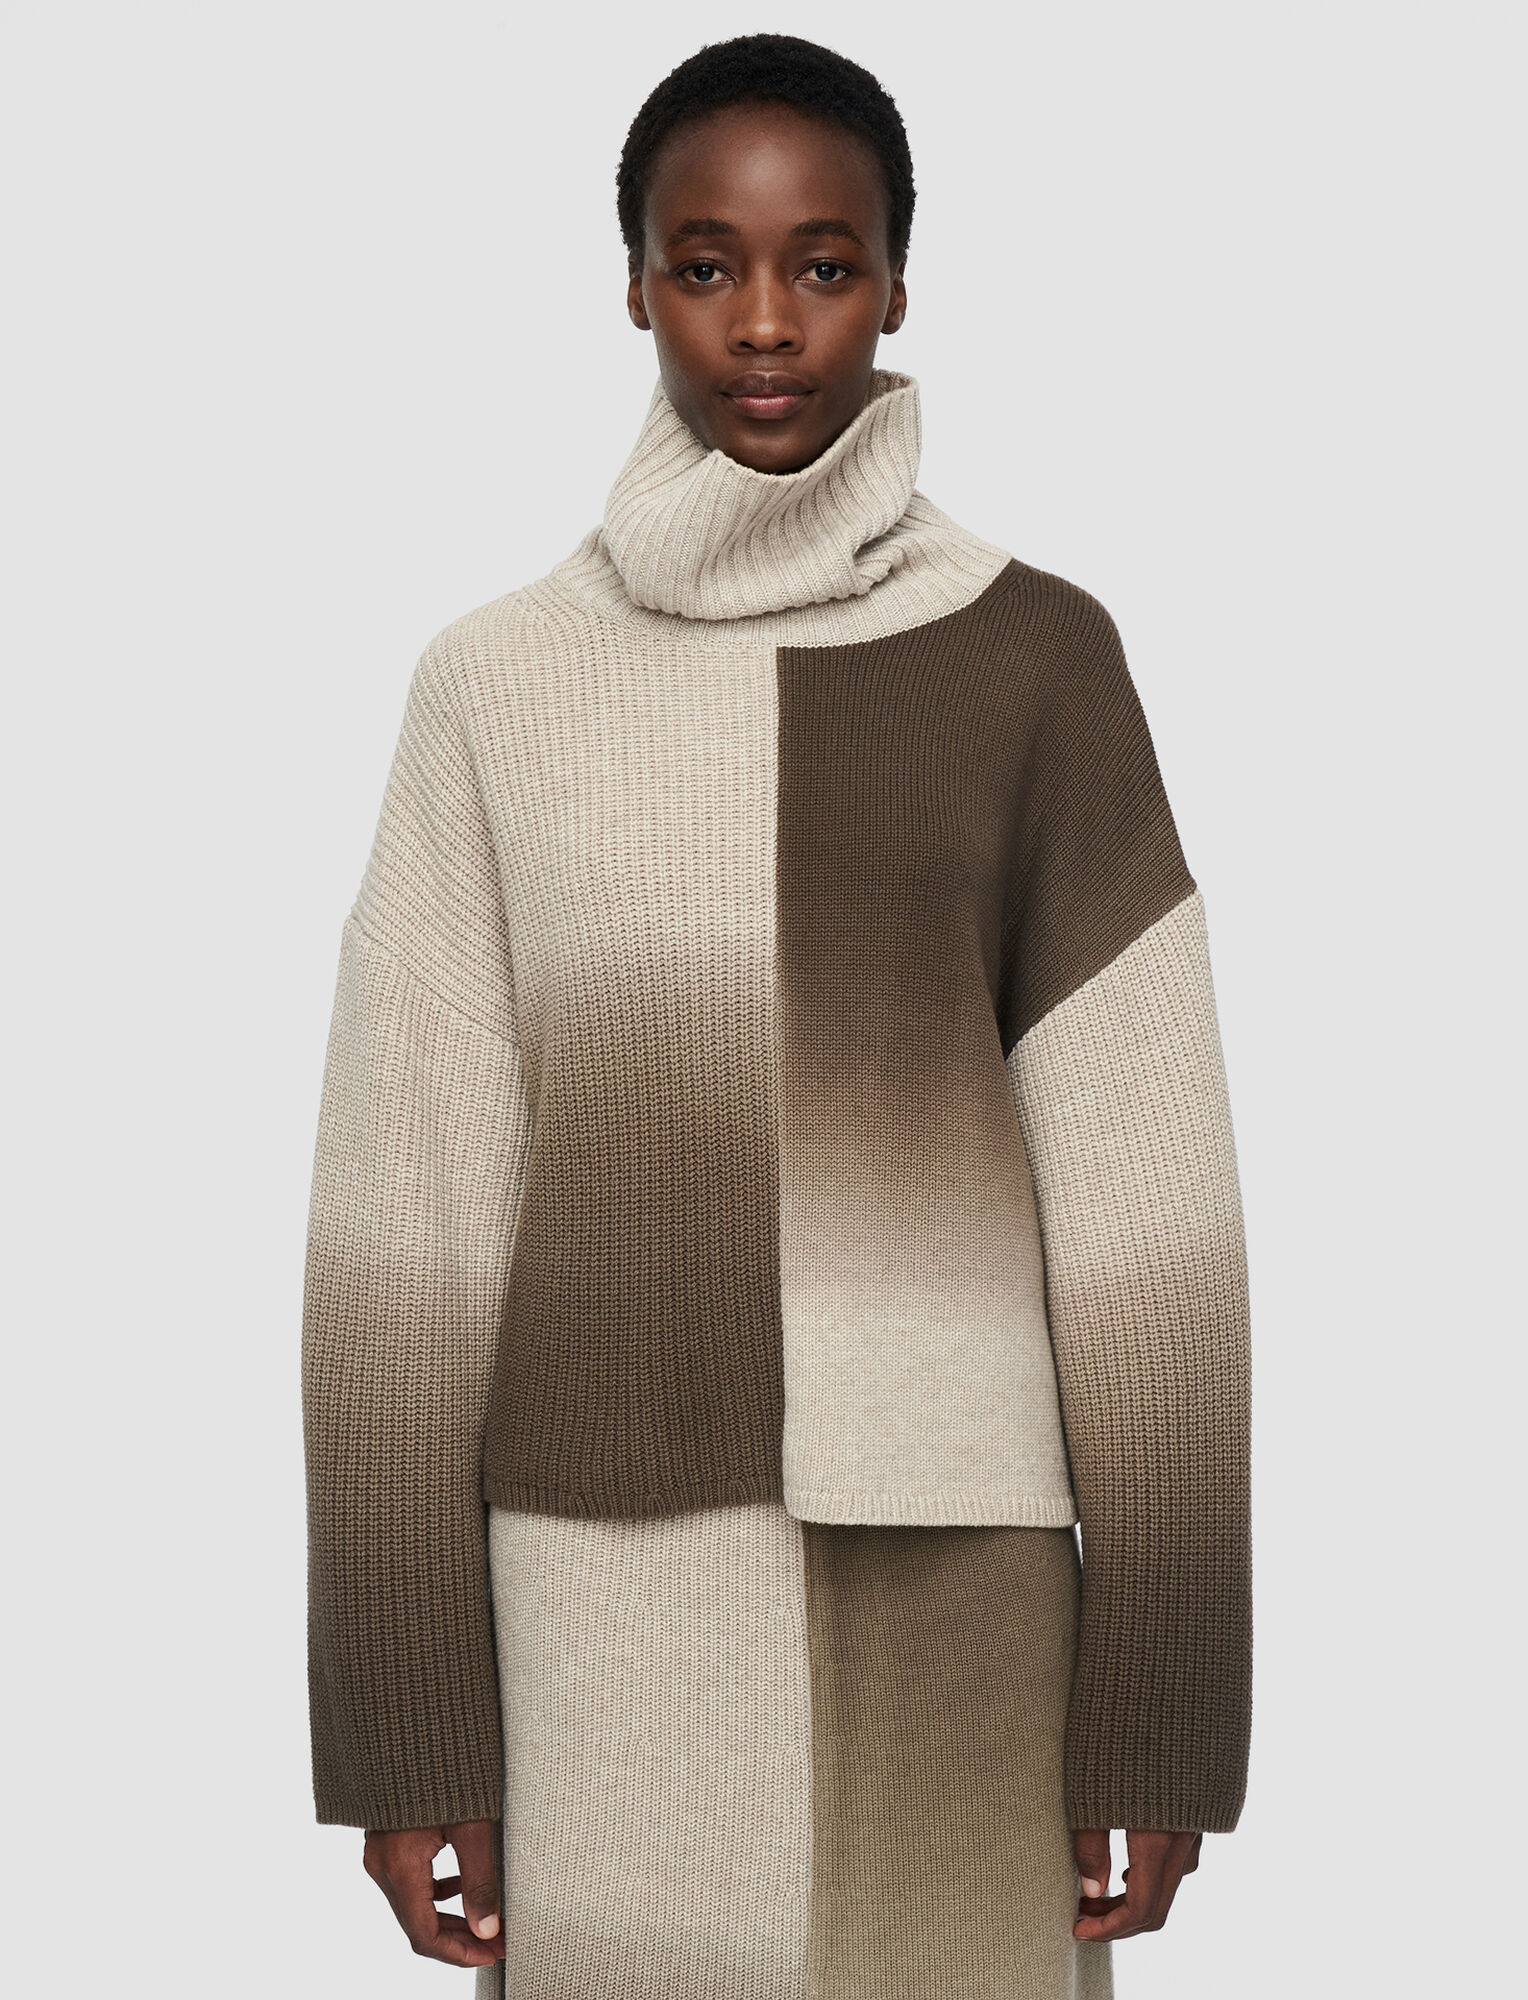 Joseph, Painted Wool Cashmere  High Neck Jumper, in Cobble Stone